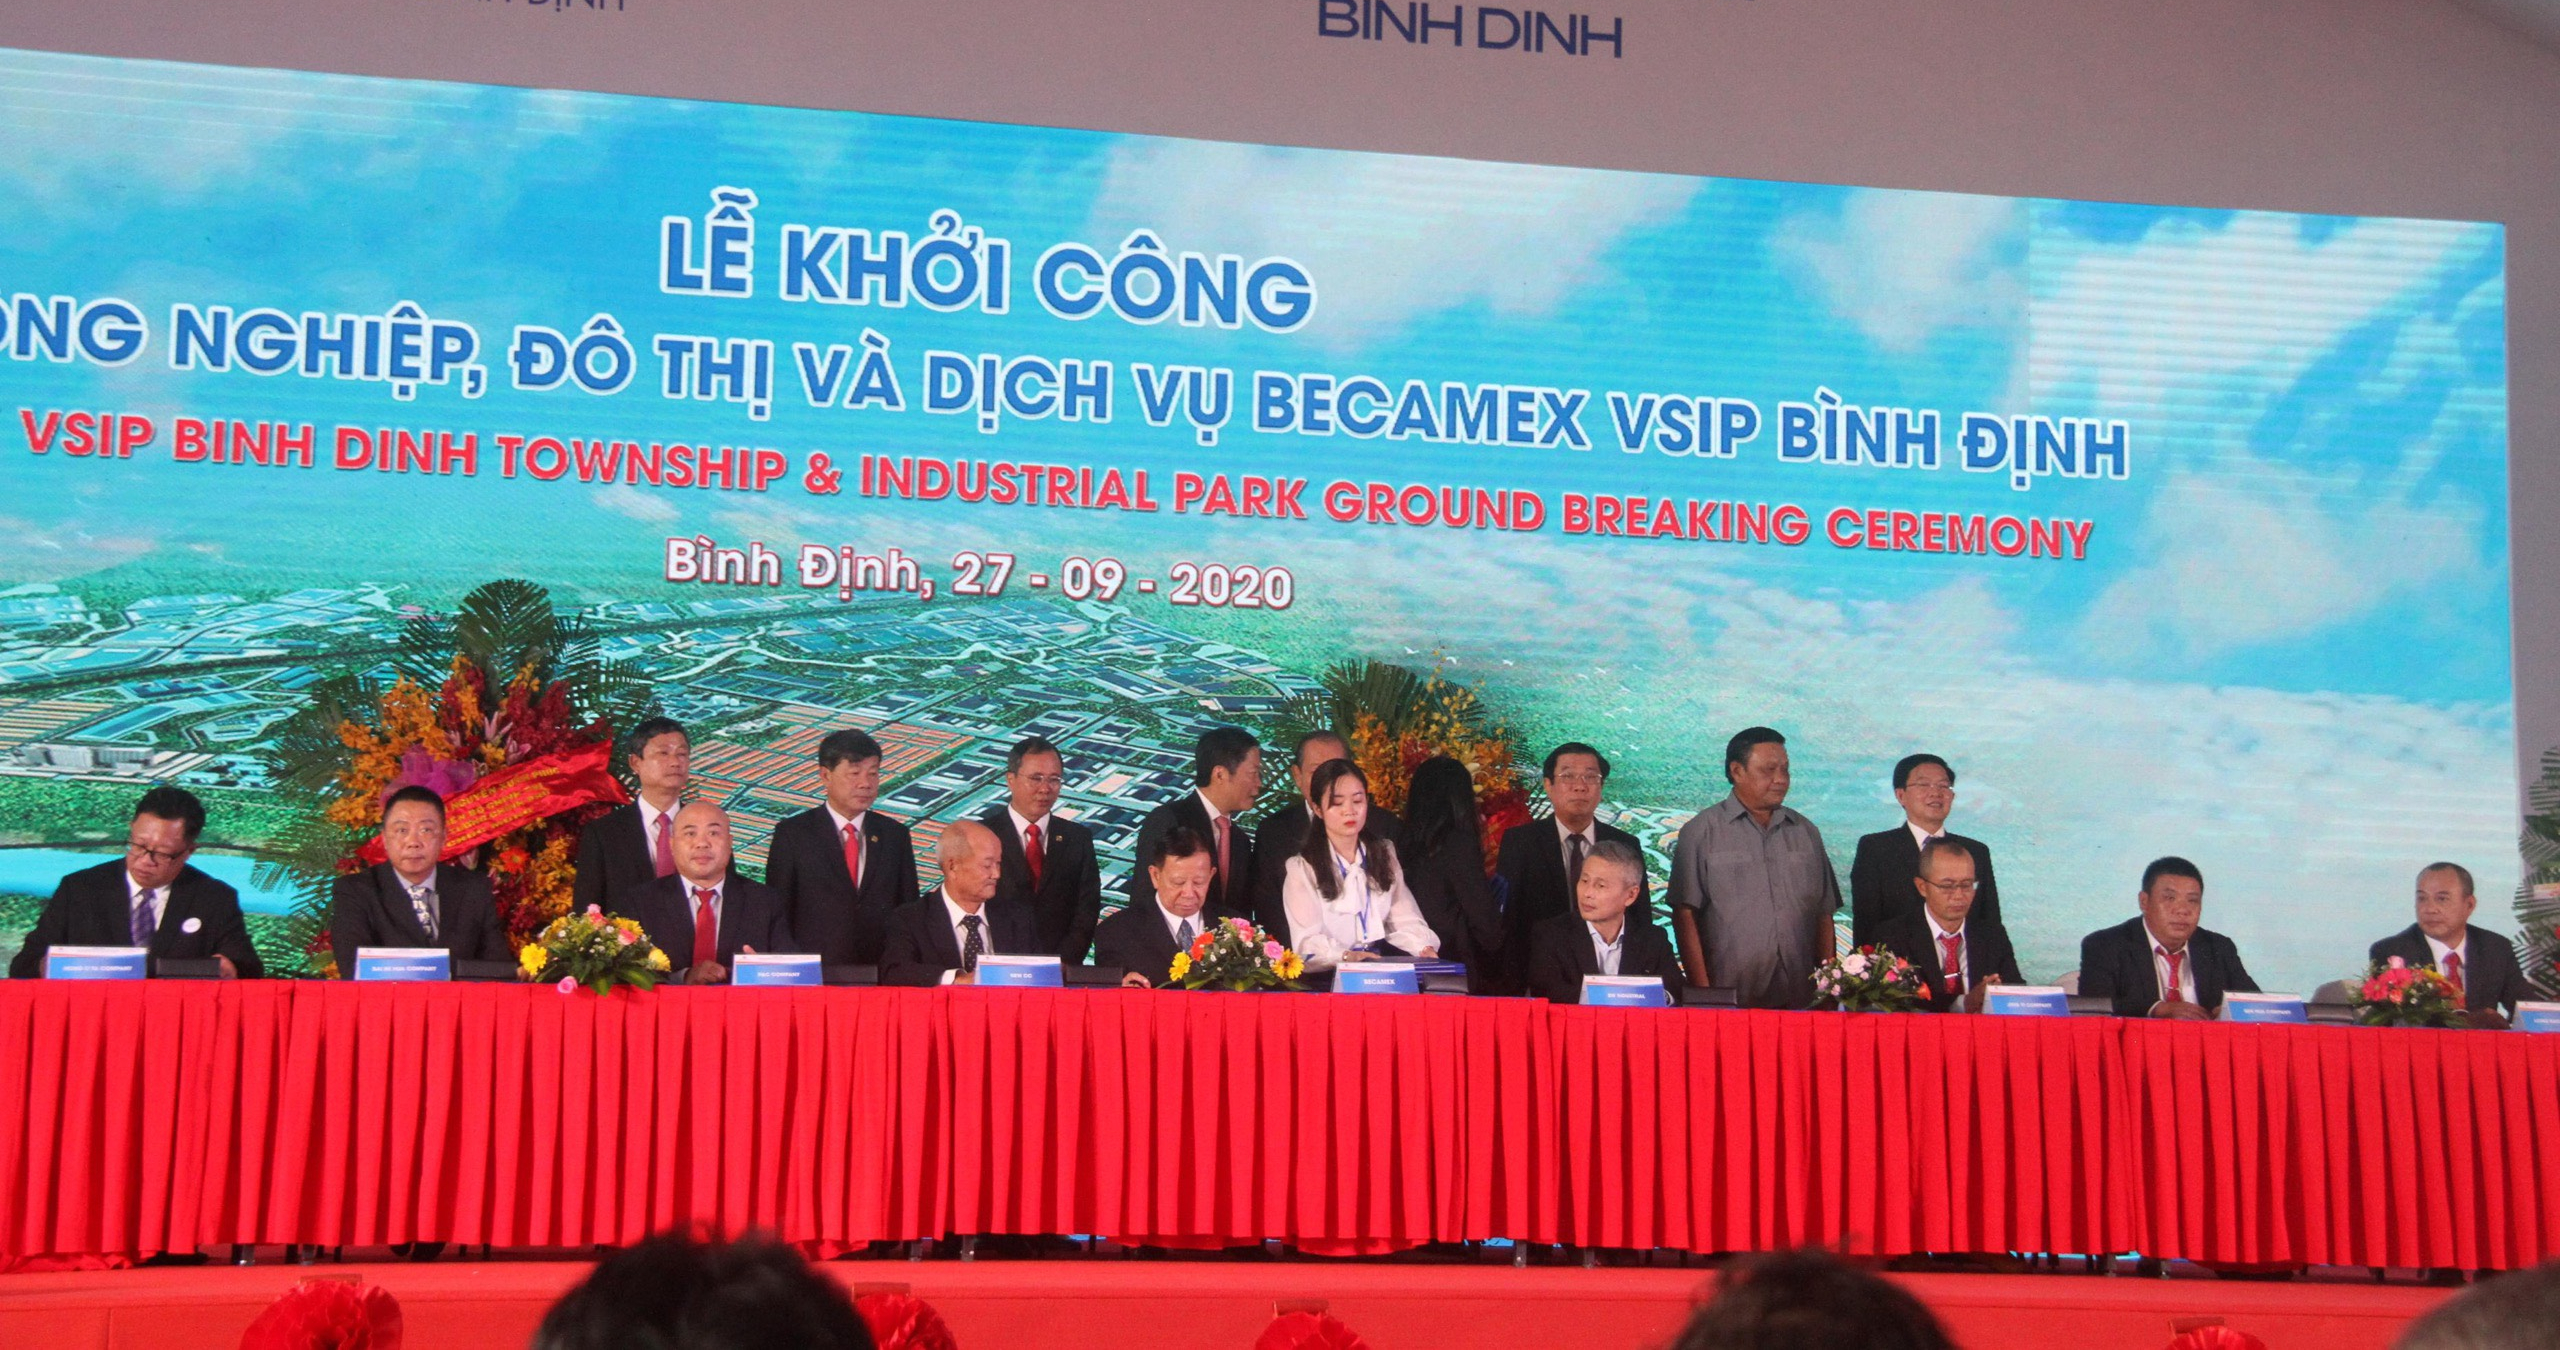 BECAMEX VSIP BINH DINH TOWNSHIP & INDUSTRIAL PARK BREAKS THE GROUND